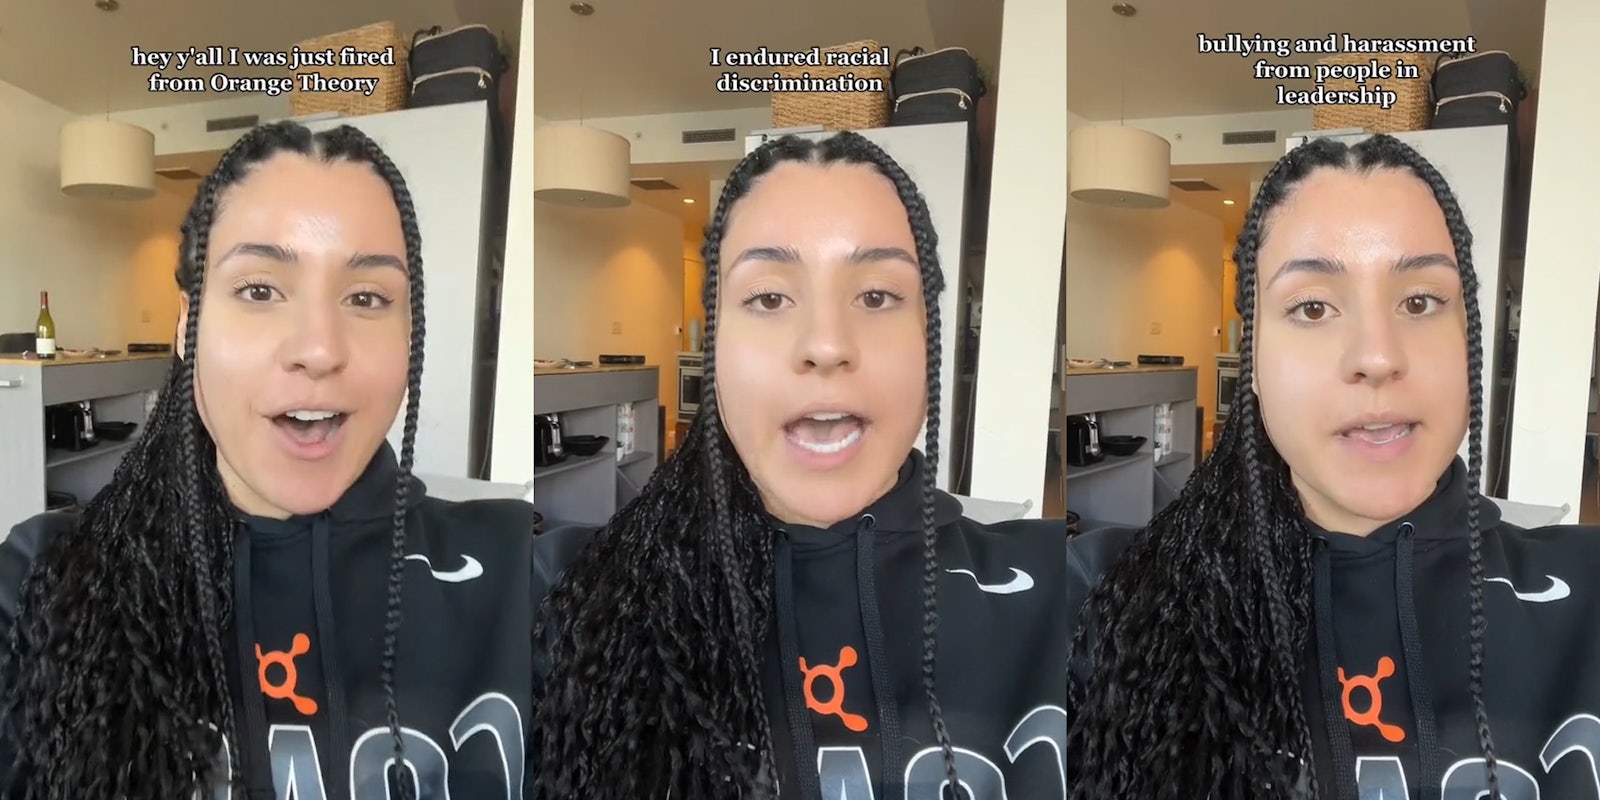 former Orange Theory employee speaking with caption 'hey y'all I was just fired from Orange Theory' (l) former Orange Theory employee speaking with caption 'I endured racial discrimination' (c) former Orange Theory employee speaking with caption 'bullying and harassment from people in leadership' (r)